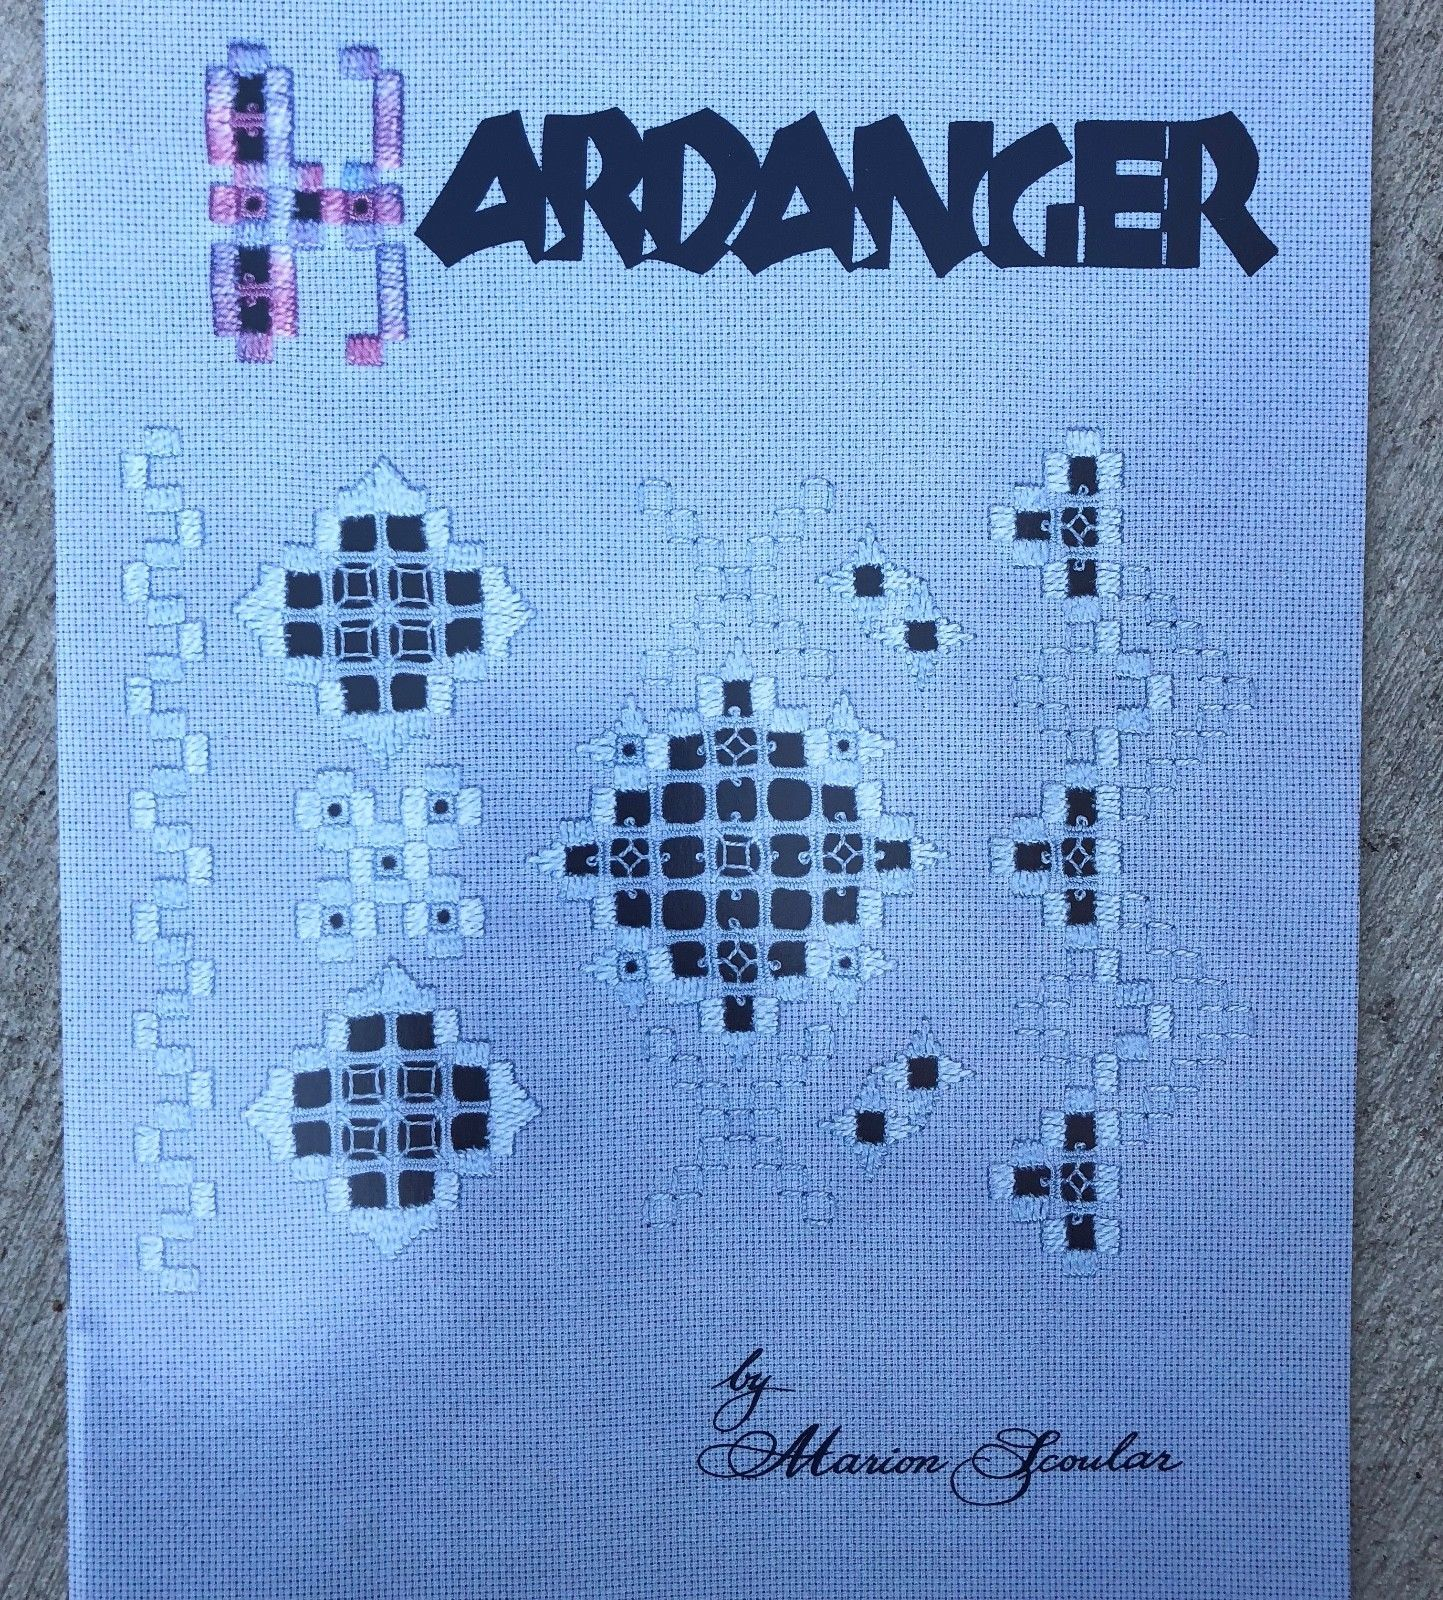 Hardanger Embroidery Patterns Online Free Hardanger Embroidery Book Marion Scoular And 23 Similar Items